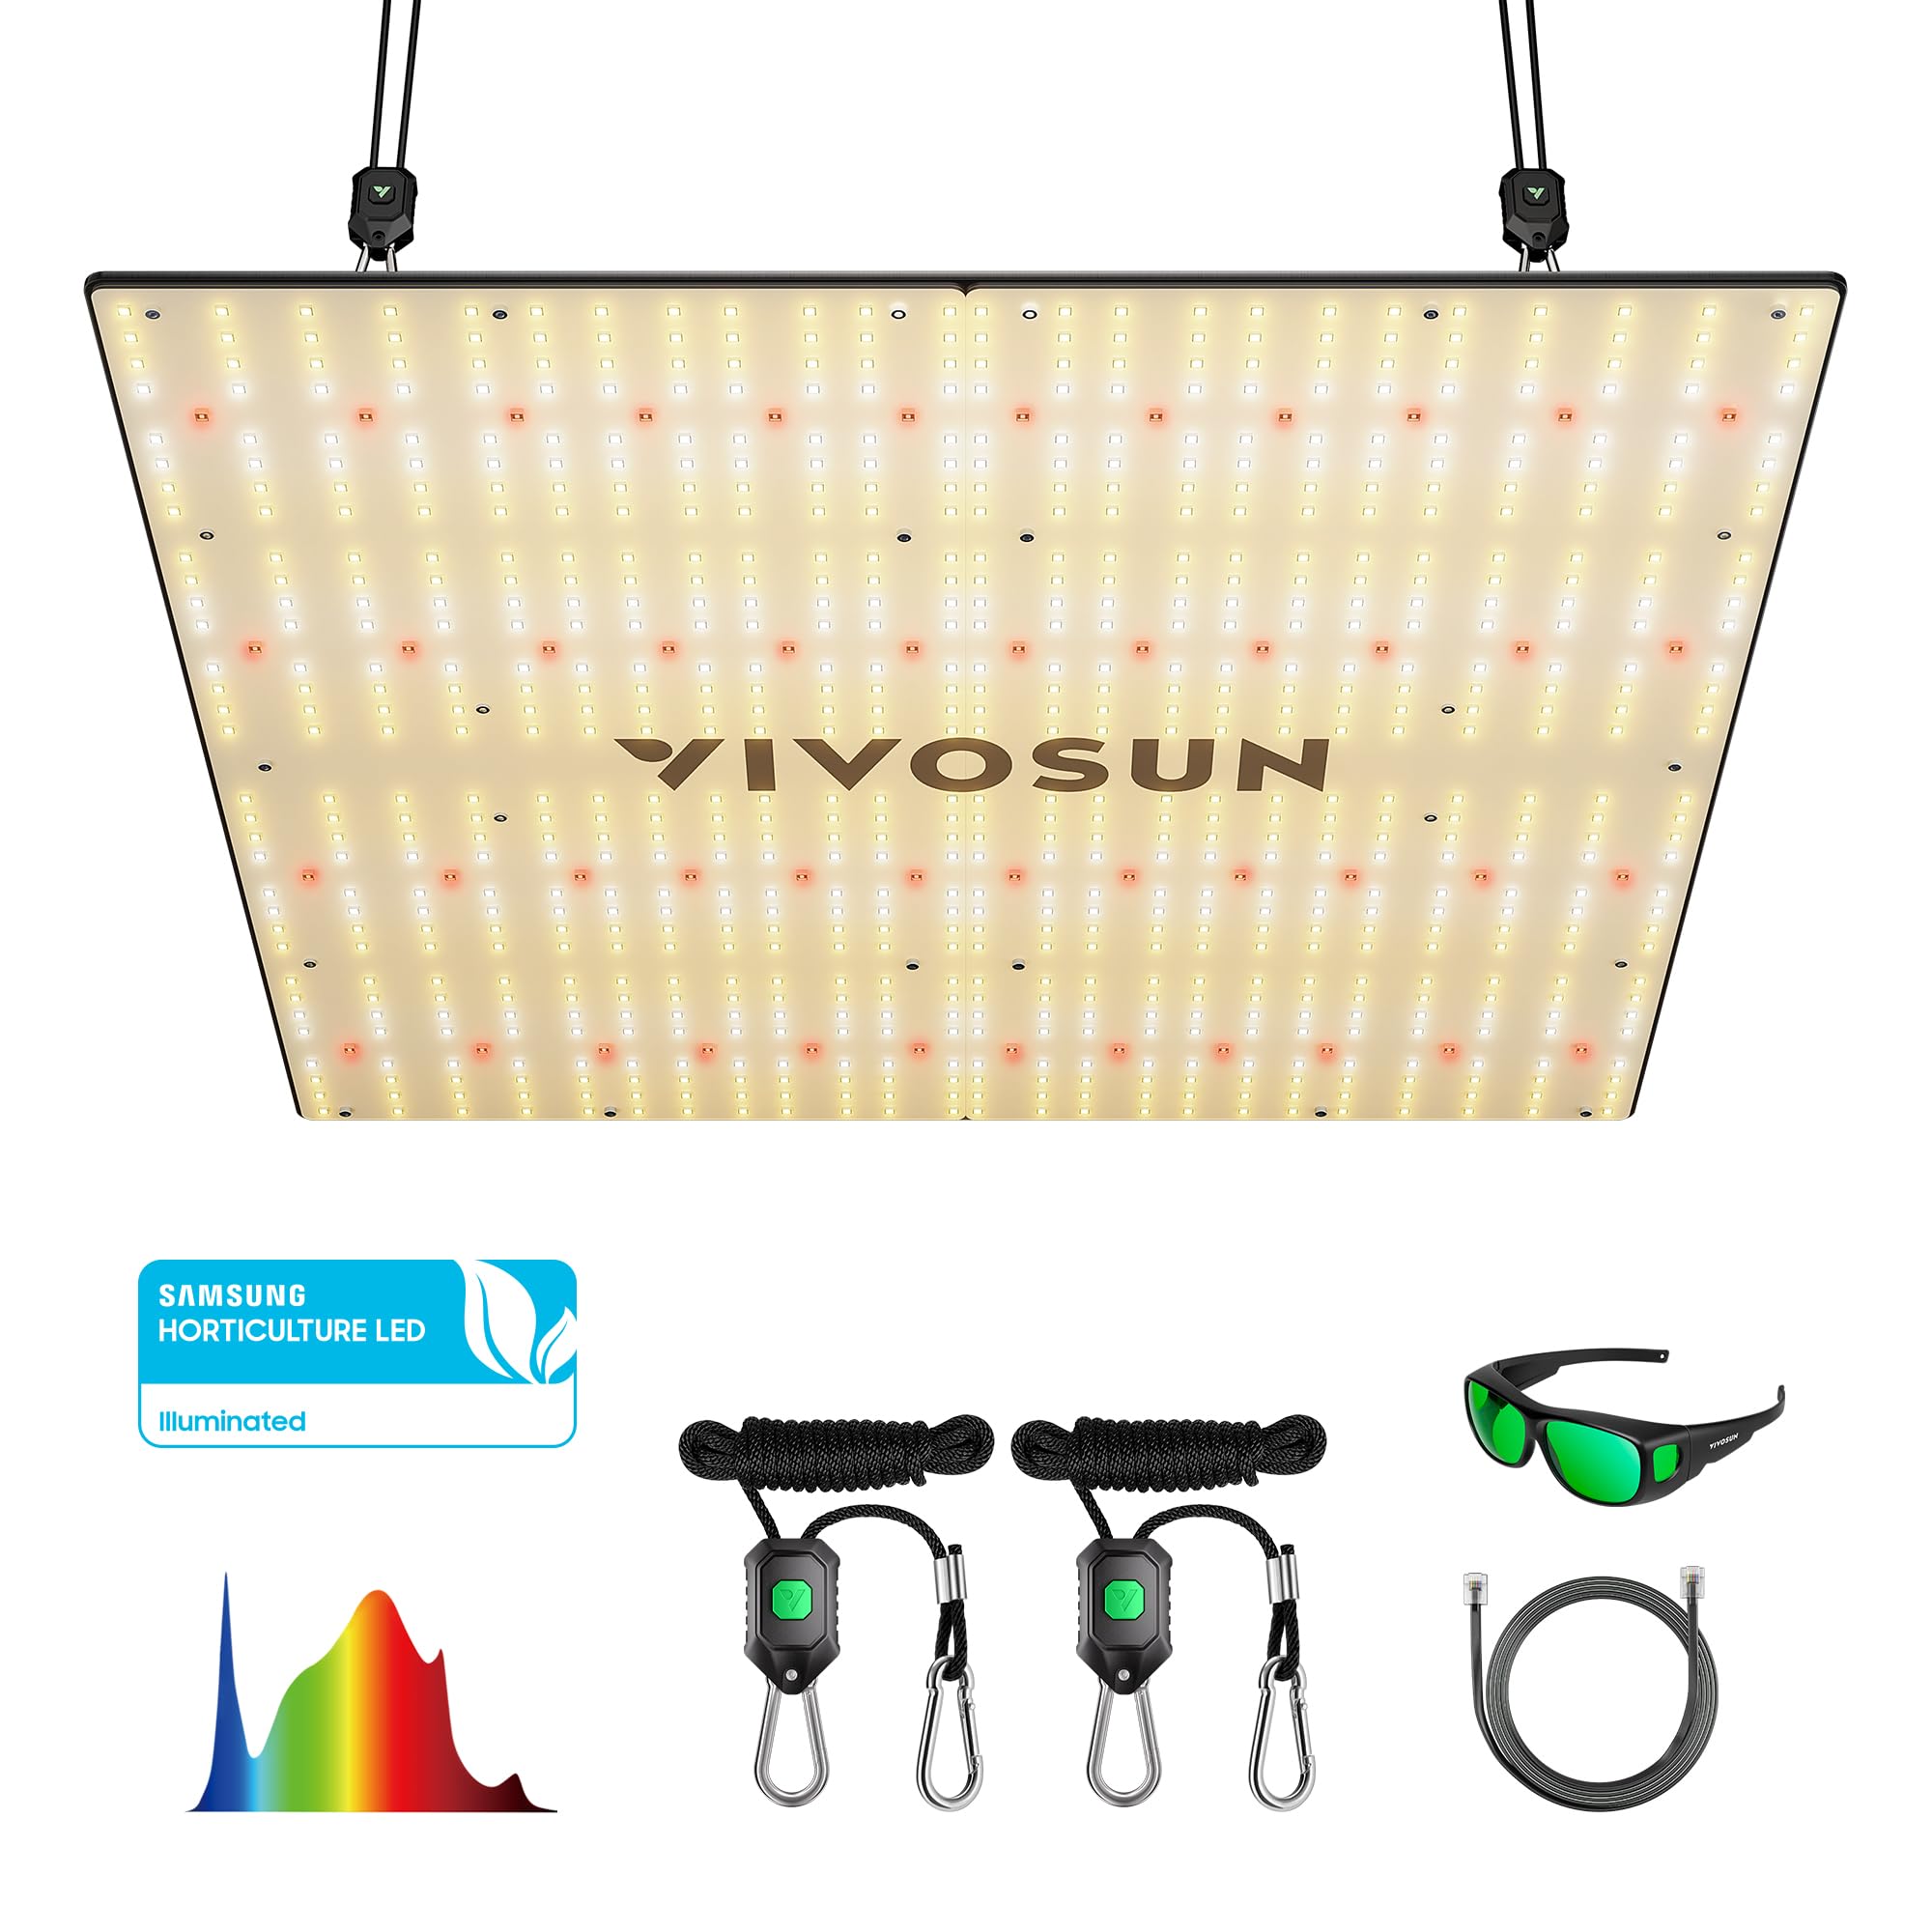 VIVOSUN VS4000 LED Grow Light with Samsung LM301 Diodes & Brand Driver Dimmable Full Spectrum Sunlike Lights with Glasses for Seedling Veg & Bloom Plant Lamp for 4x4/5x5 Tent